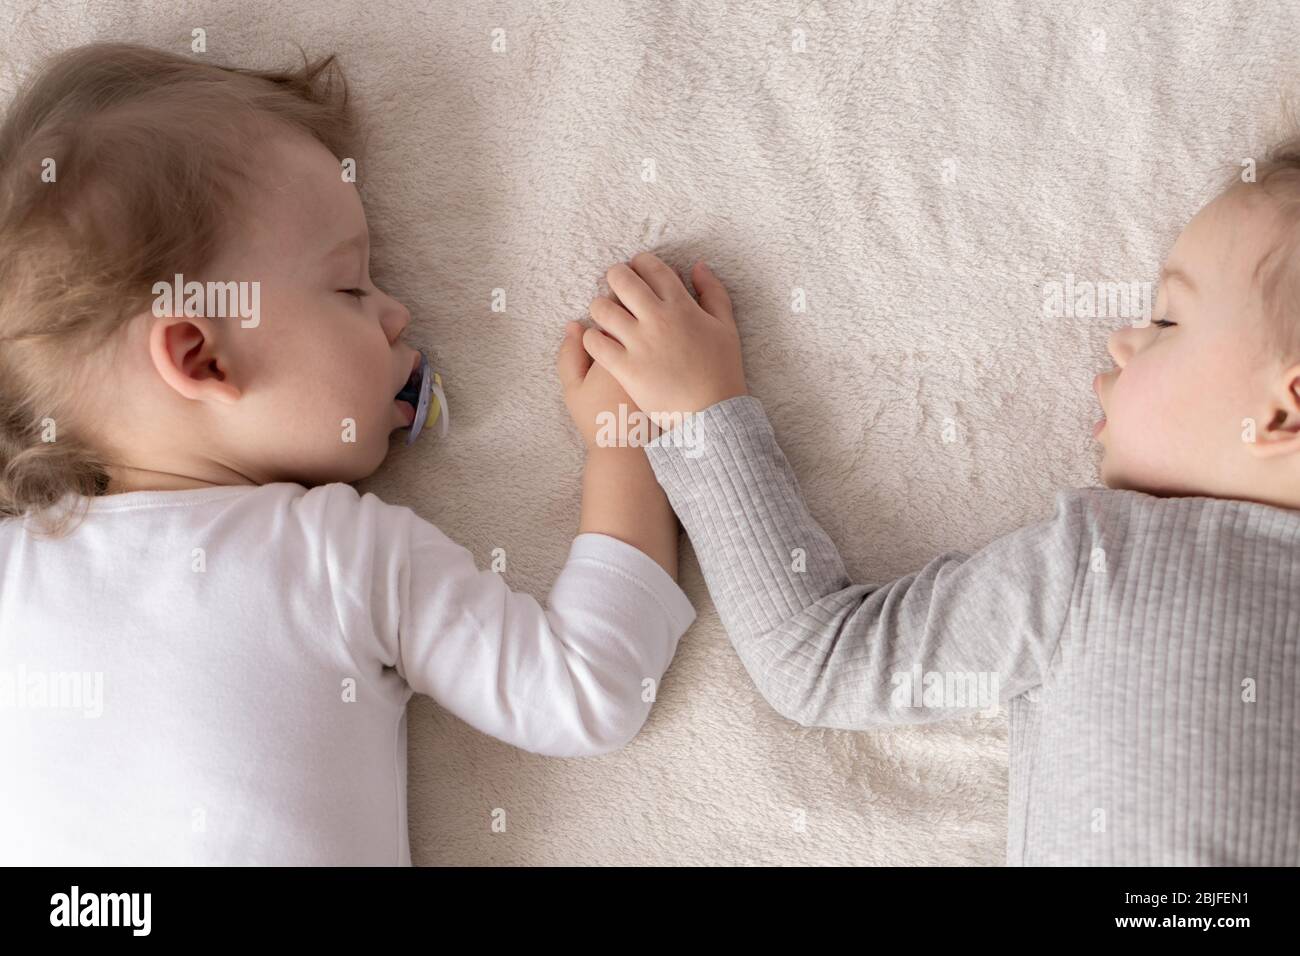 Childhood, sleep, relaxation, family, lifestyle concept - two young children 2 and 3 years old dressed in white and beige bodysuit sleep on a beige Stock Photo